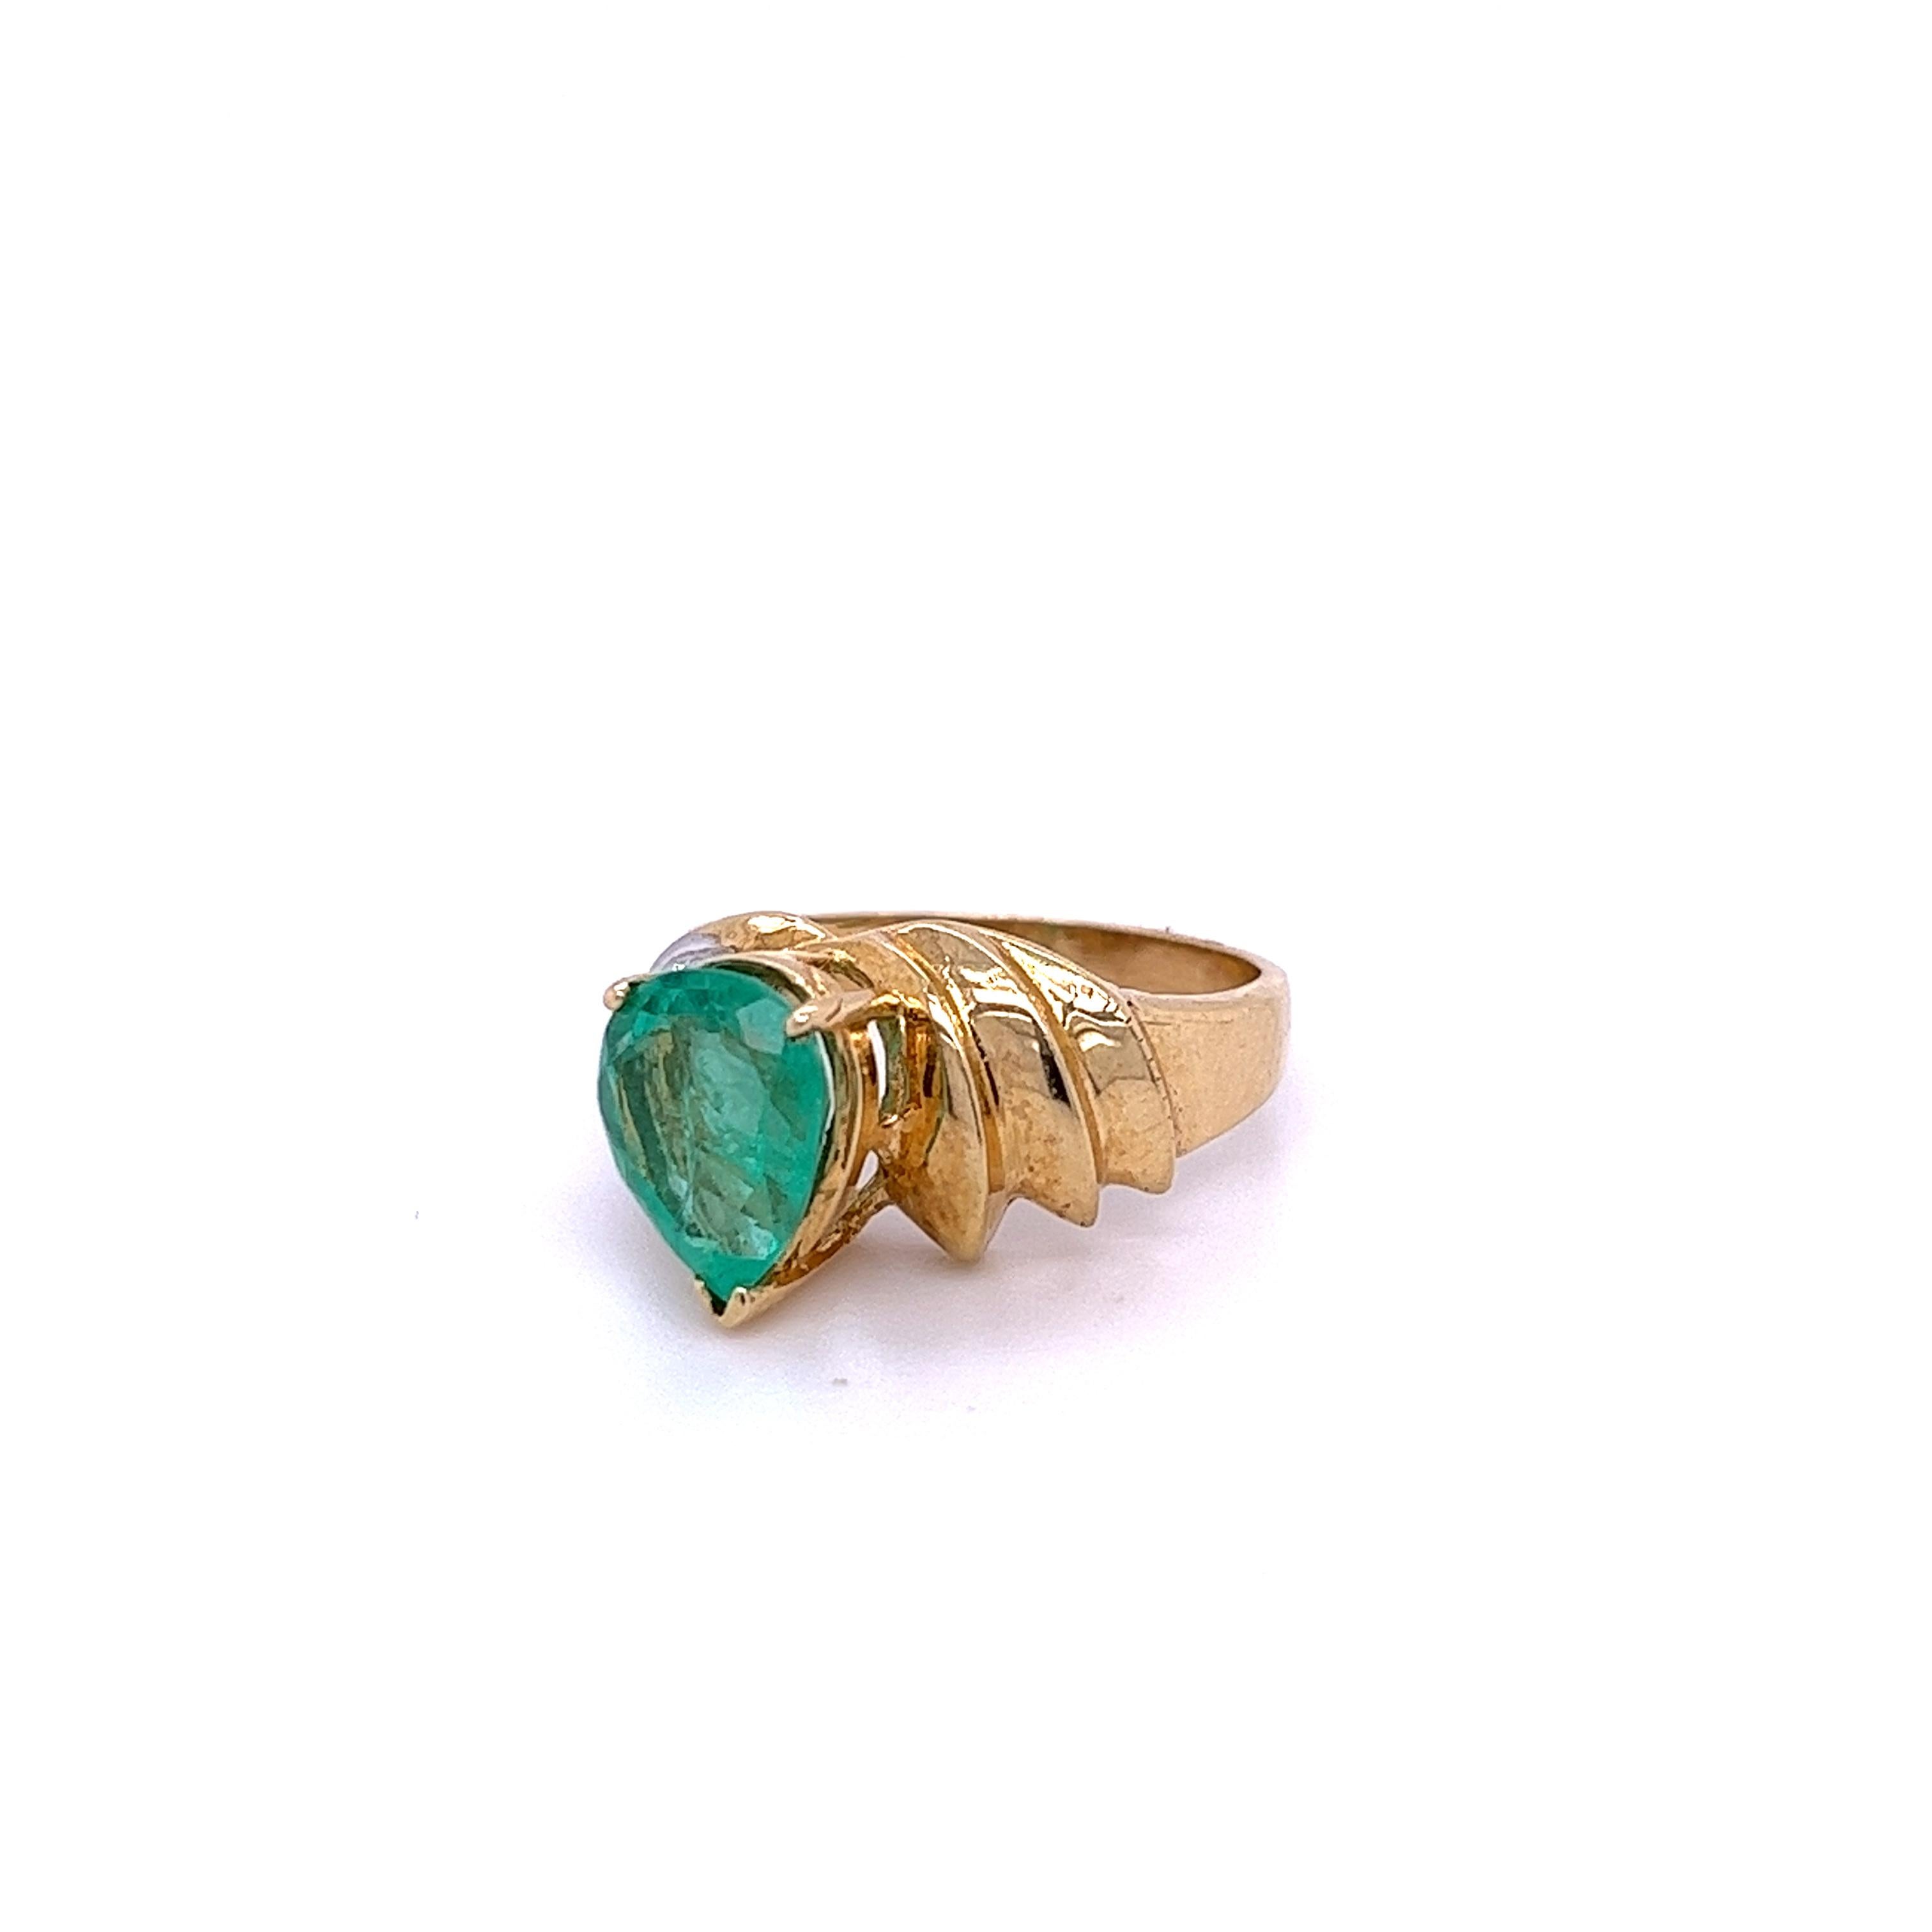 1.60-carat pear cut natural Colombian Emerald mounted in a secure 14k solid gold ring setting with 0.20 carats in round diamond accents. 14k solid gold ring and secure prong setting make for a secure fit that's ideal for daily wear. Hypoallergenic,